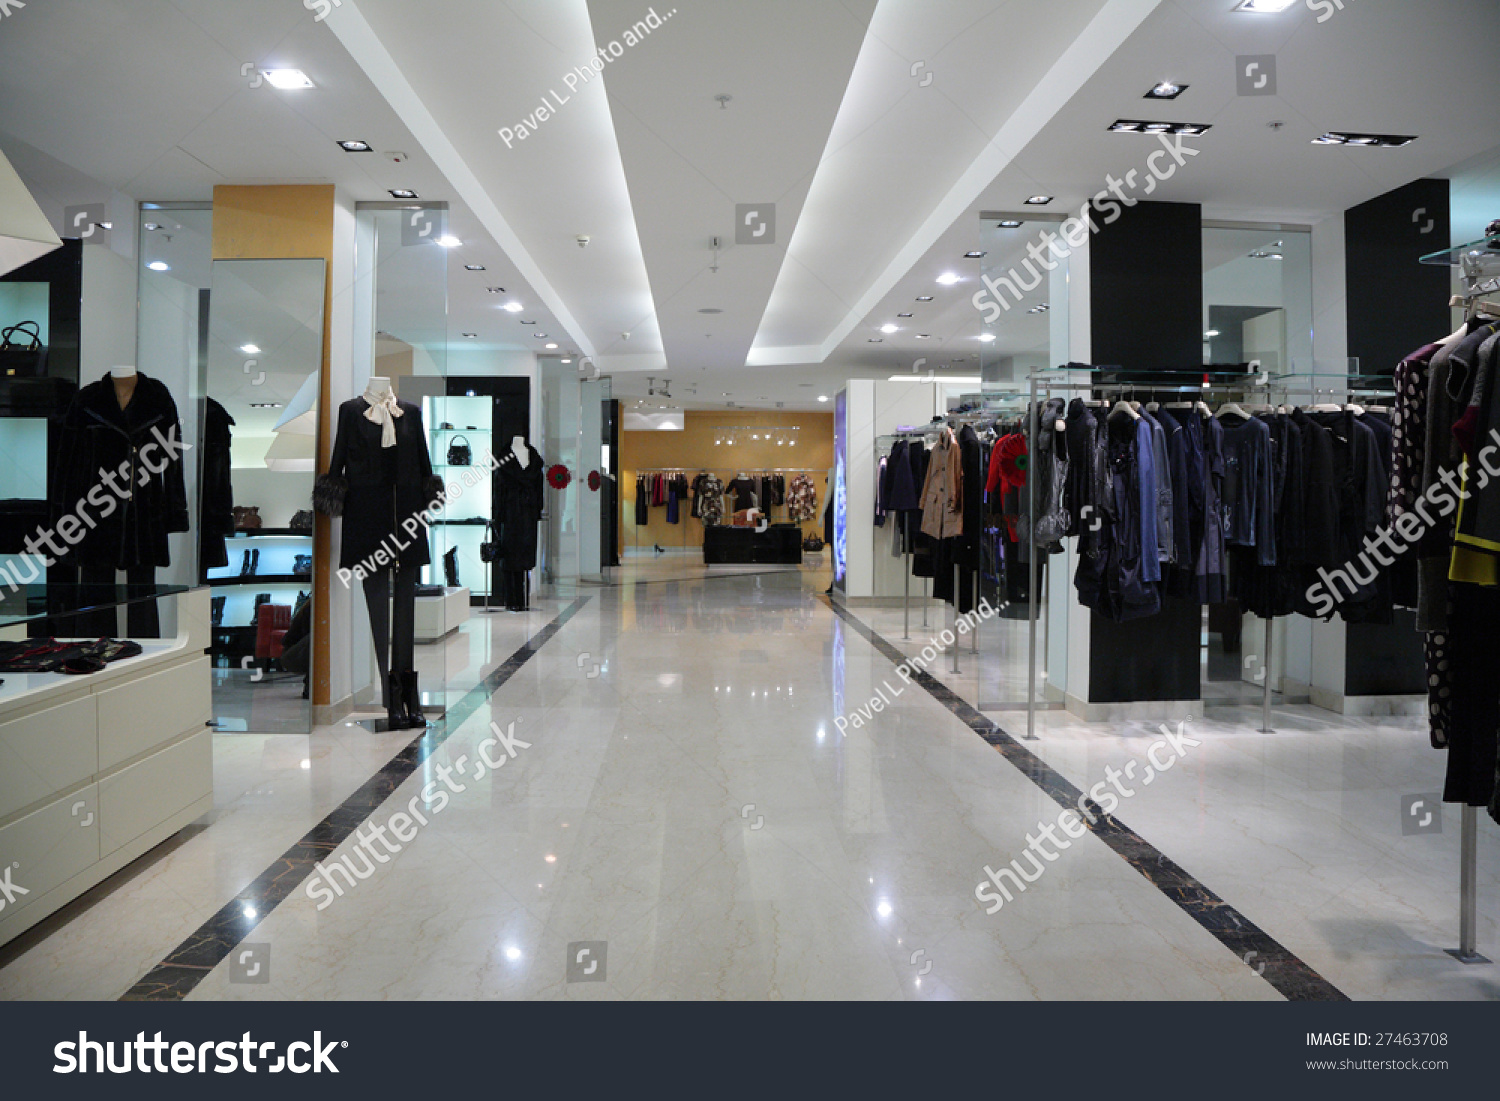 Clothes Shop Stock Photo 27463708 : Shutterstock